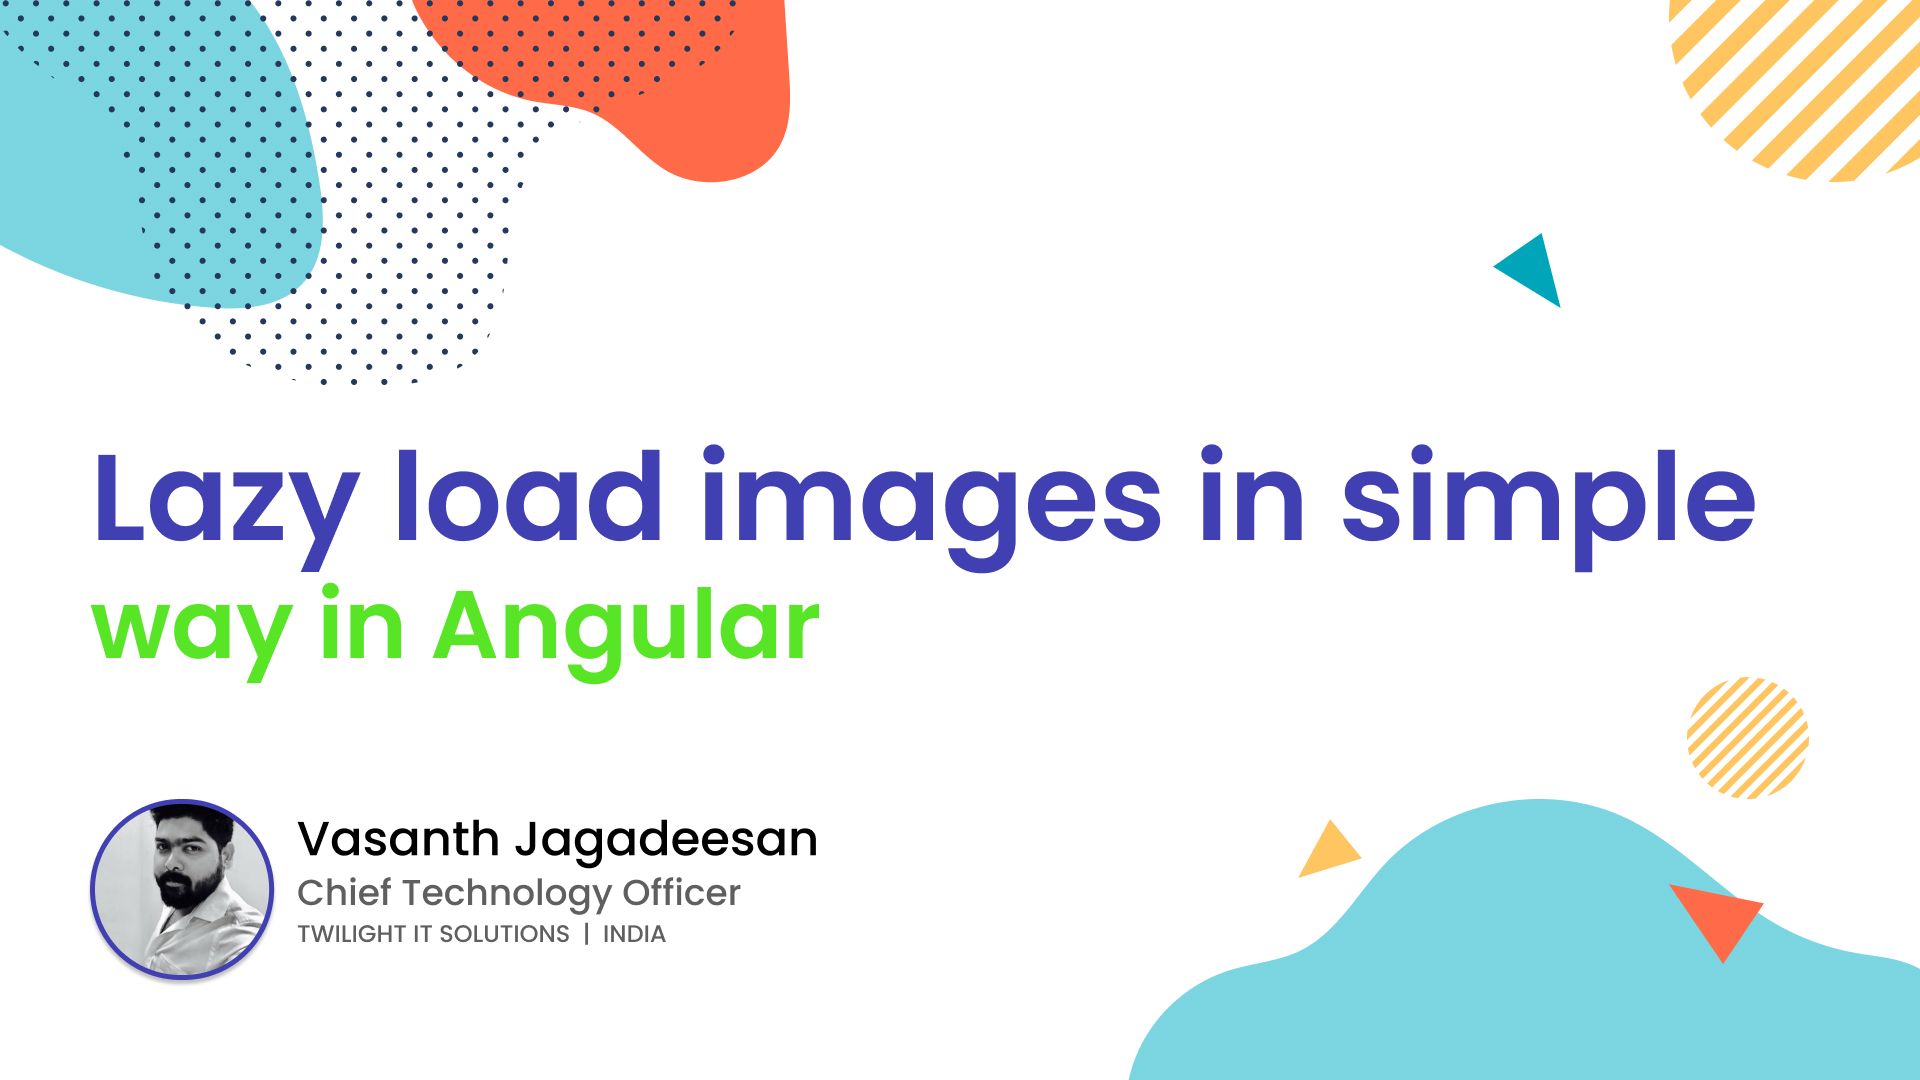 Lazy load images in simple way using Angular - mobilelabs.in